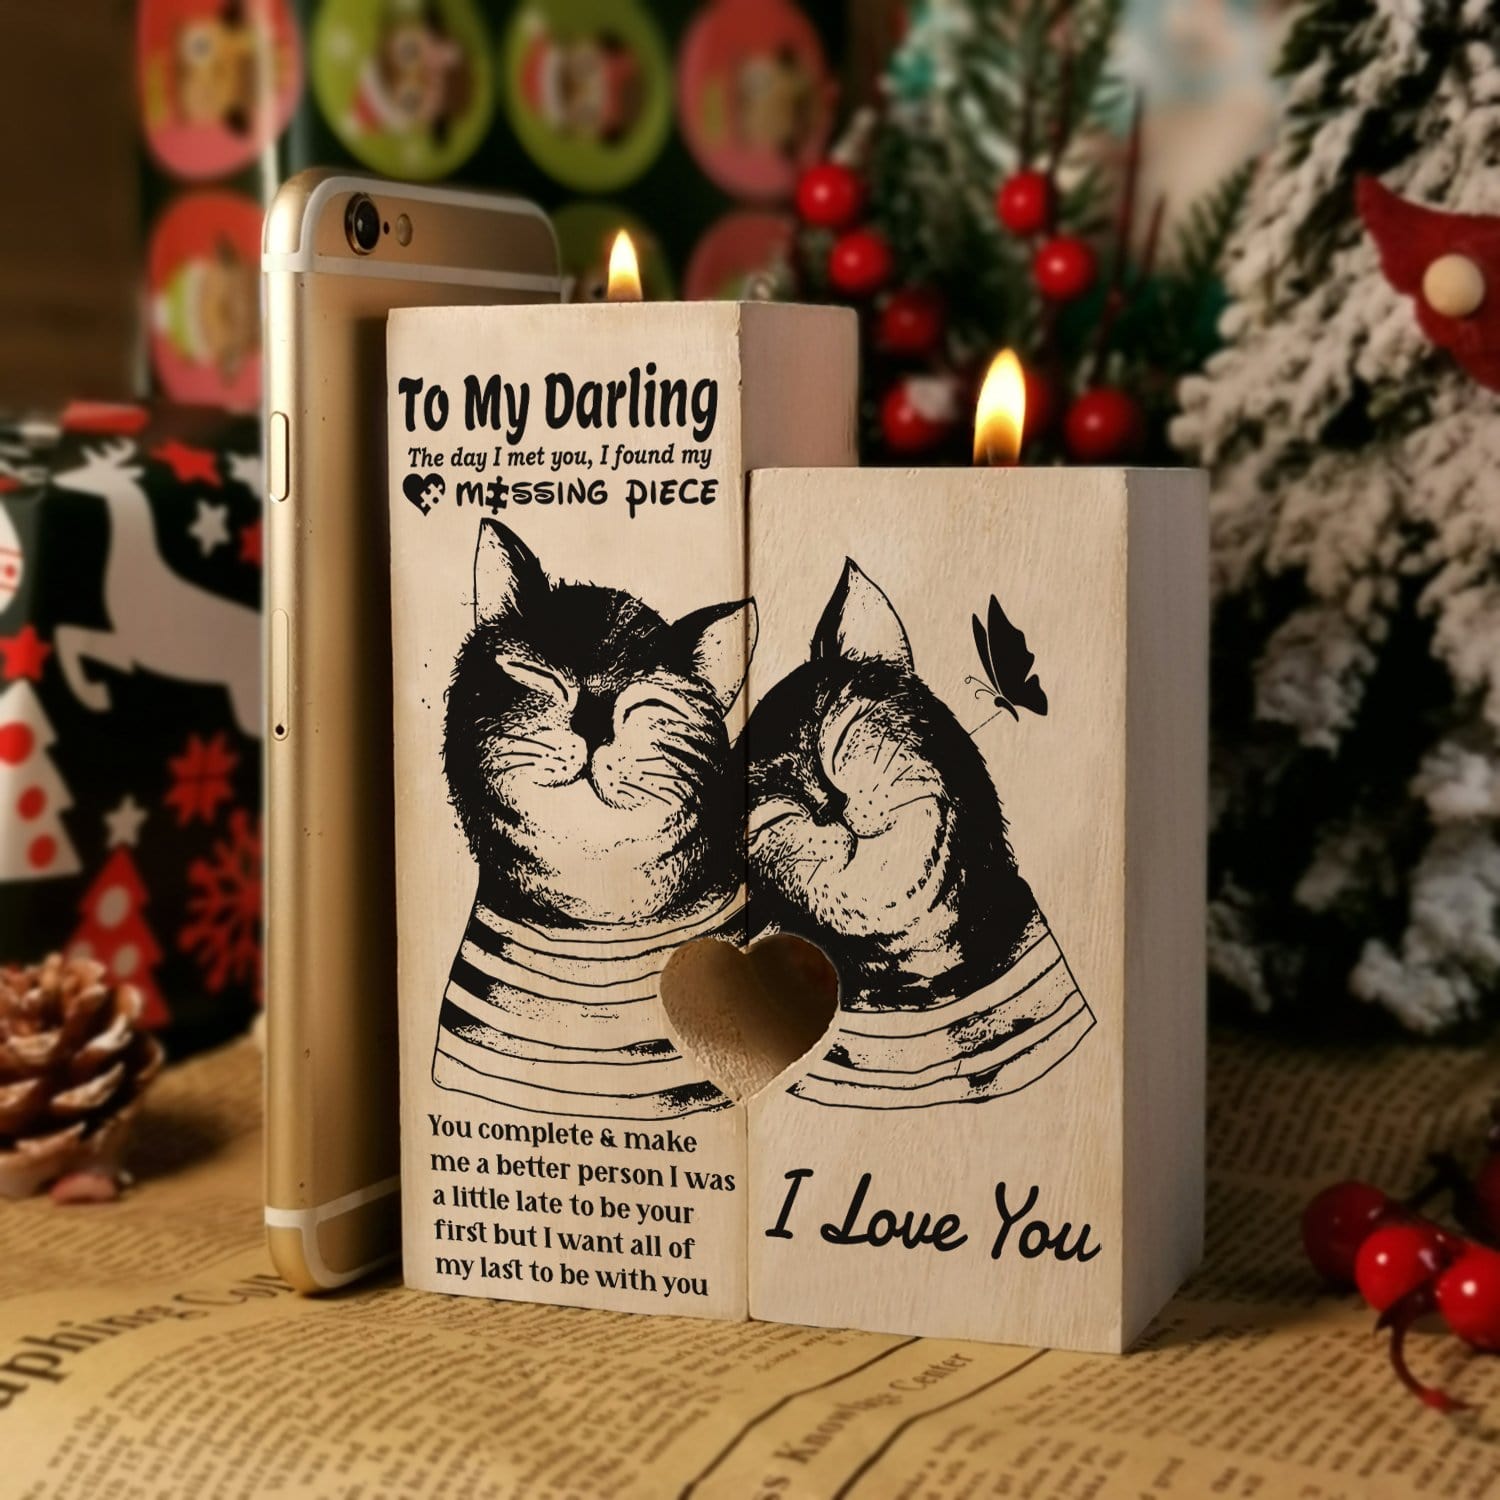 Candle Holders To My Darling - I Love You Wooden Candle Holders GiveMe-Gifts